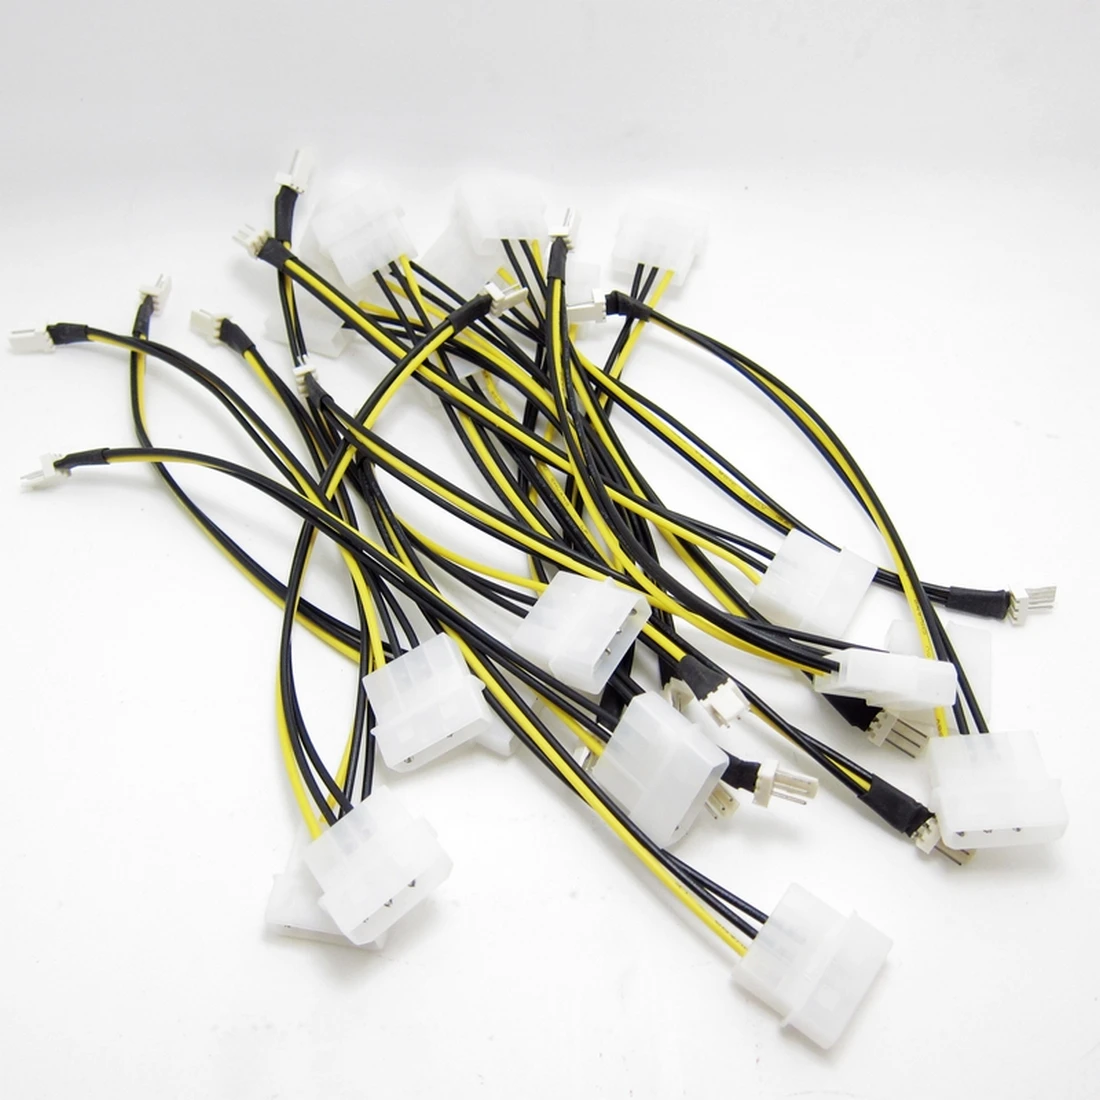 H5f92783bee83492691222b209c72791ep 1 PCS 20cm 4 Pin Molex IDE To 3 Pin PC Computer CPU Case Fan Power Connector Cable Adapter